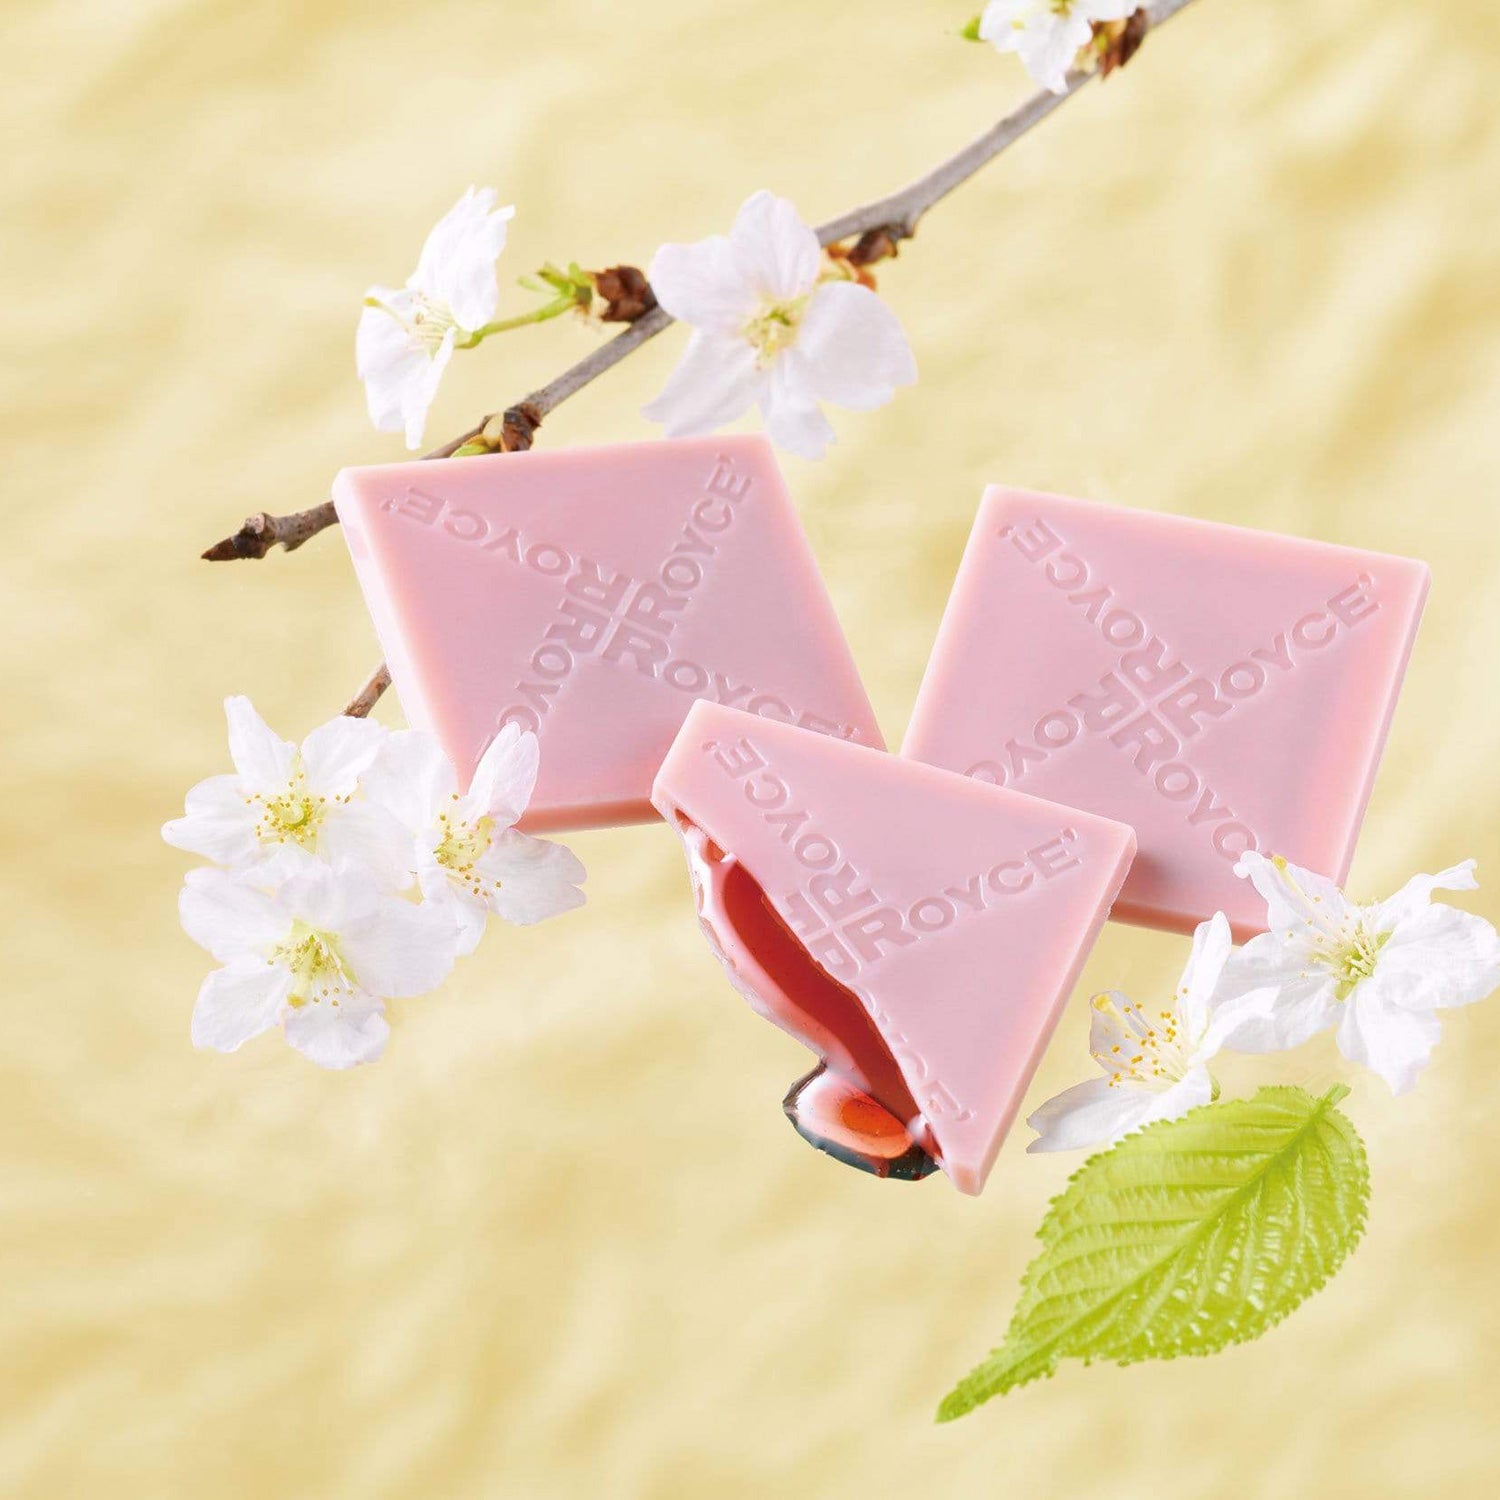 ROYCE' Chocolate - Prafeuille Chocolat "Sakura Cube" - Image shows pink chocolate squares filled with red sauce and engraved with the words "ROYCE'". Accents include green leaves and white flowers with brown and gray stems. Background is in color yellow.